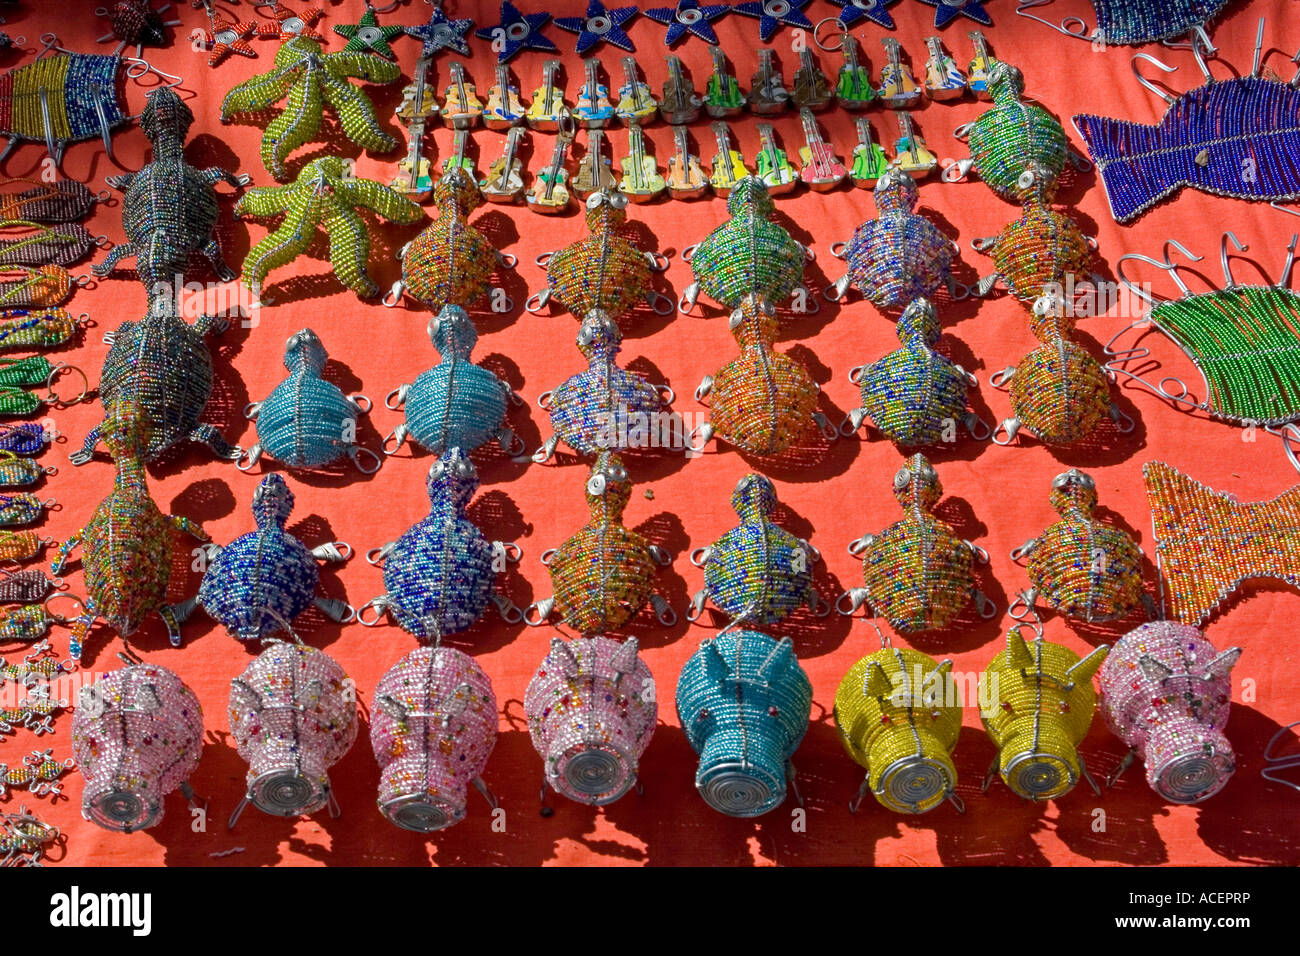 Beadwork animals for sale in Saturday craft market, Maputo, Mozambique, Southern Africa Stock Photo